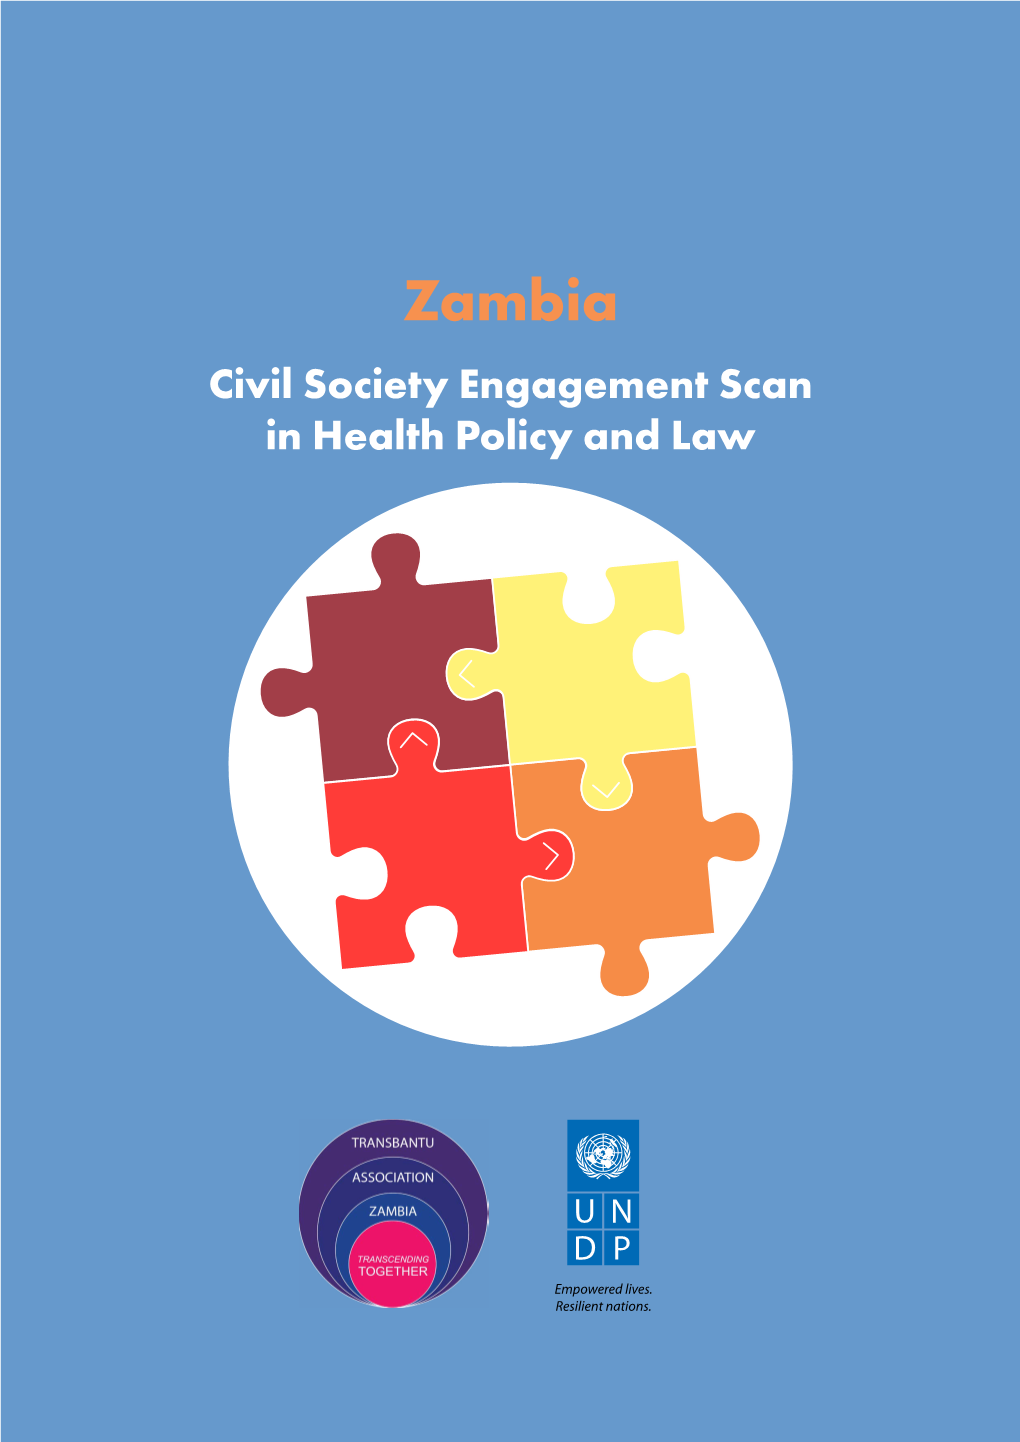 Zambia Civil Society Engagement Scan in Health Policy and Law